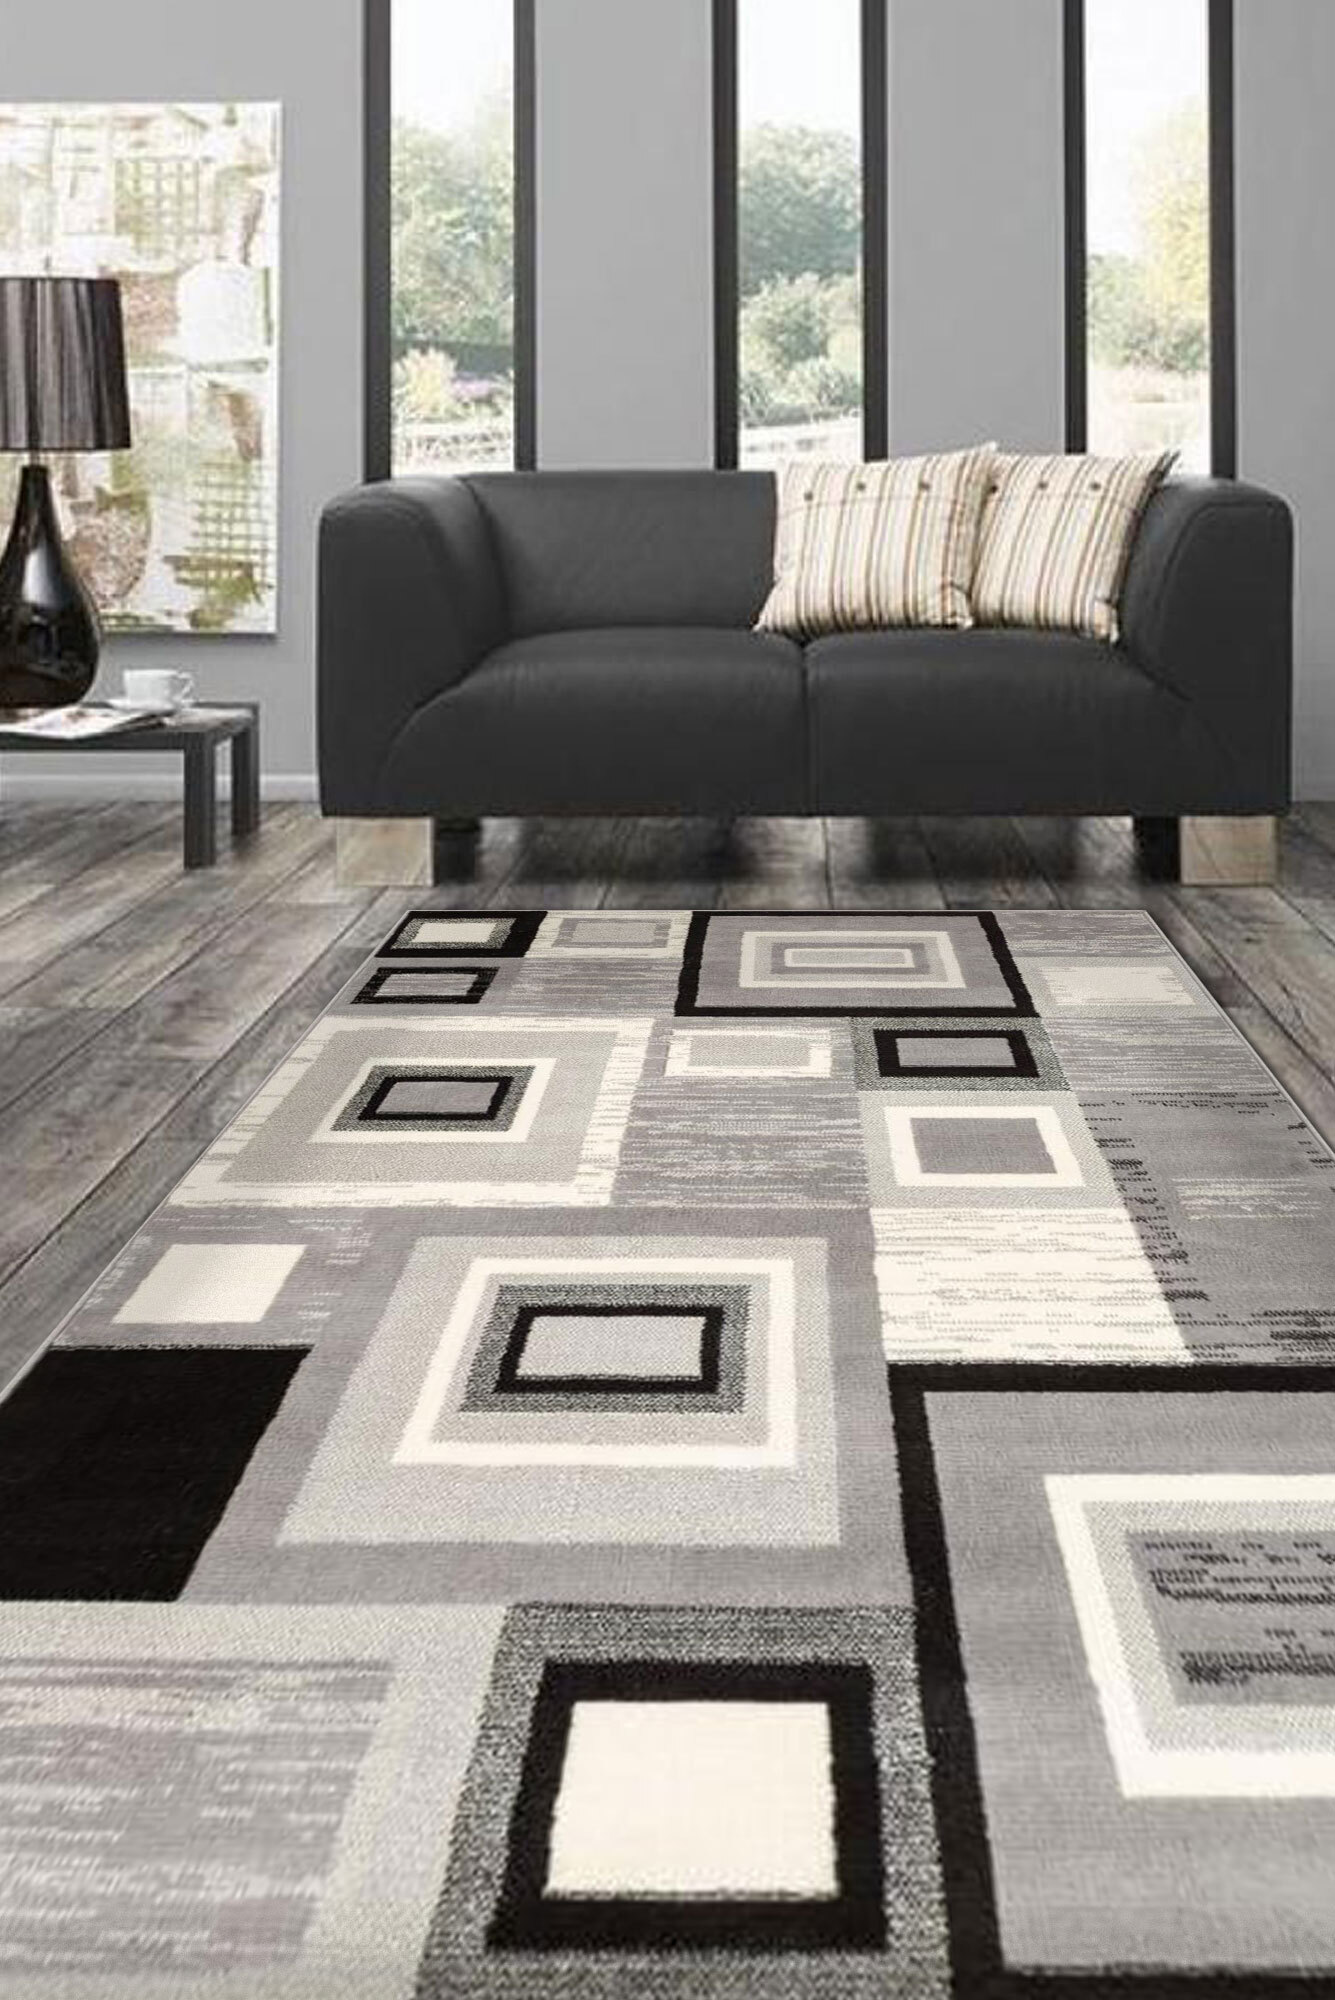 Axel Modern Square Pattern Rug(Size 170 x 120cm)